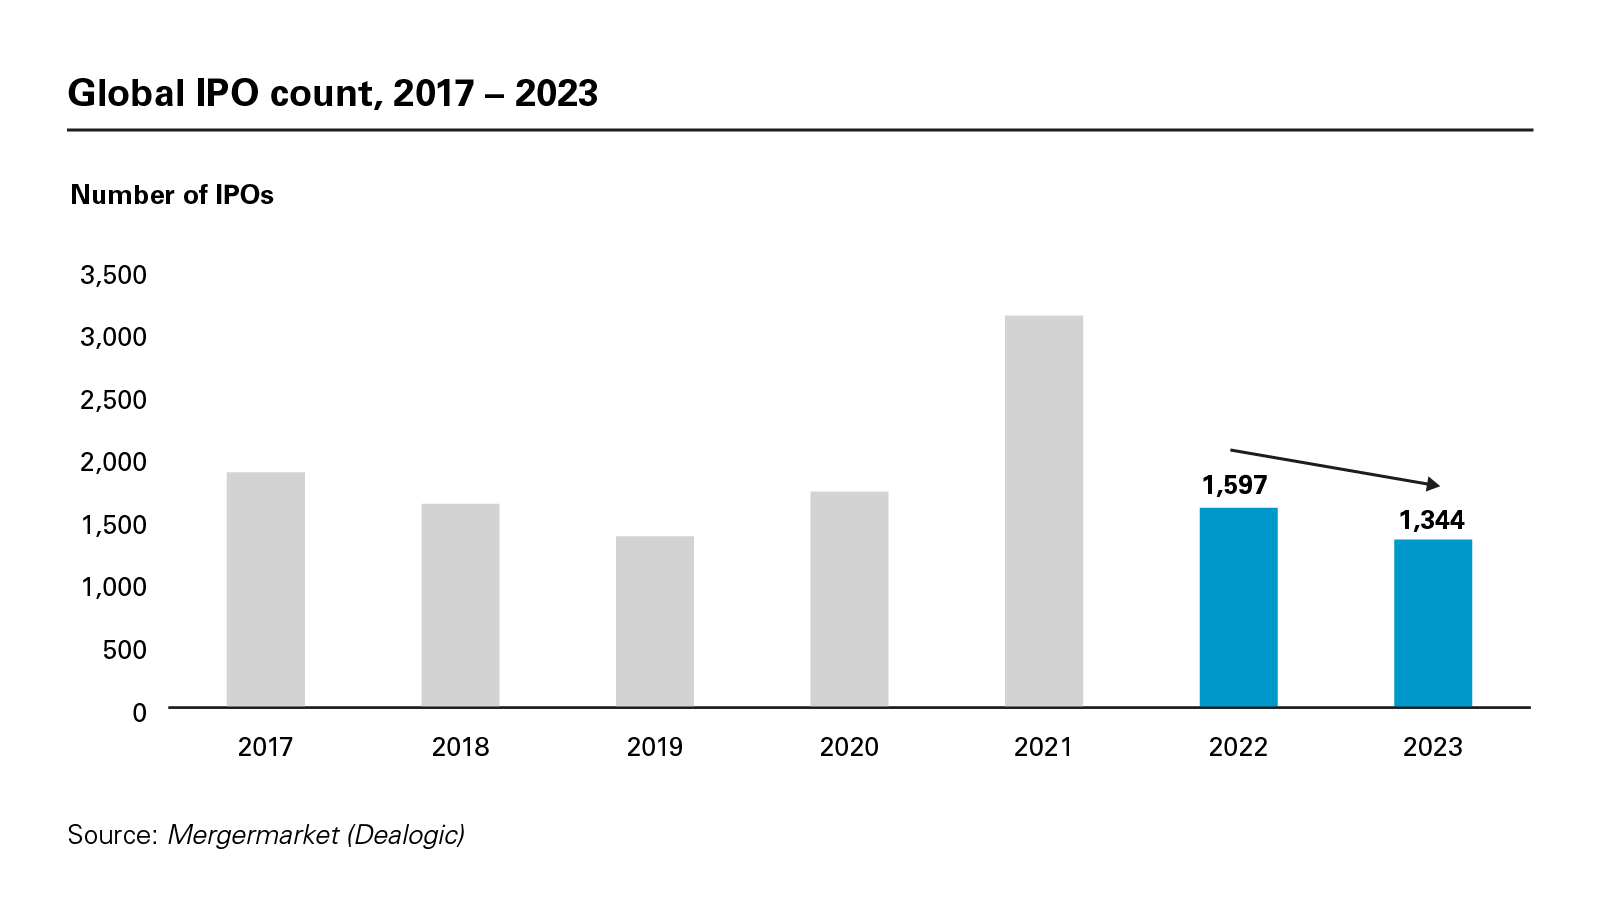 Global IPO count, 2017 – 2023